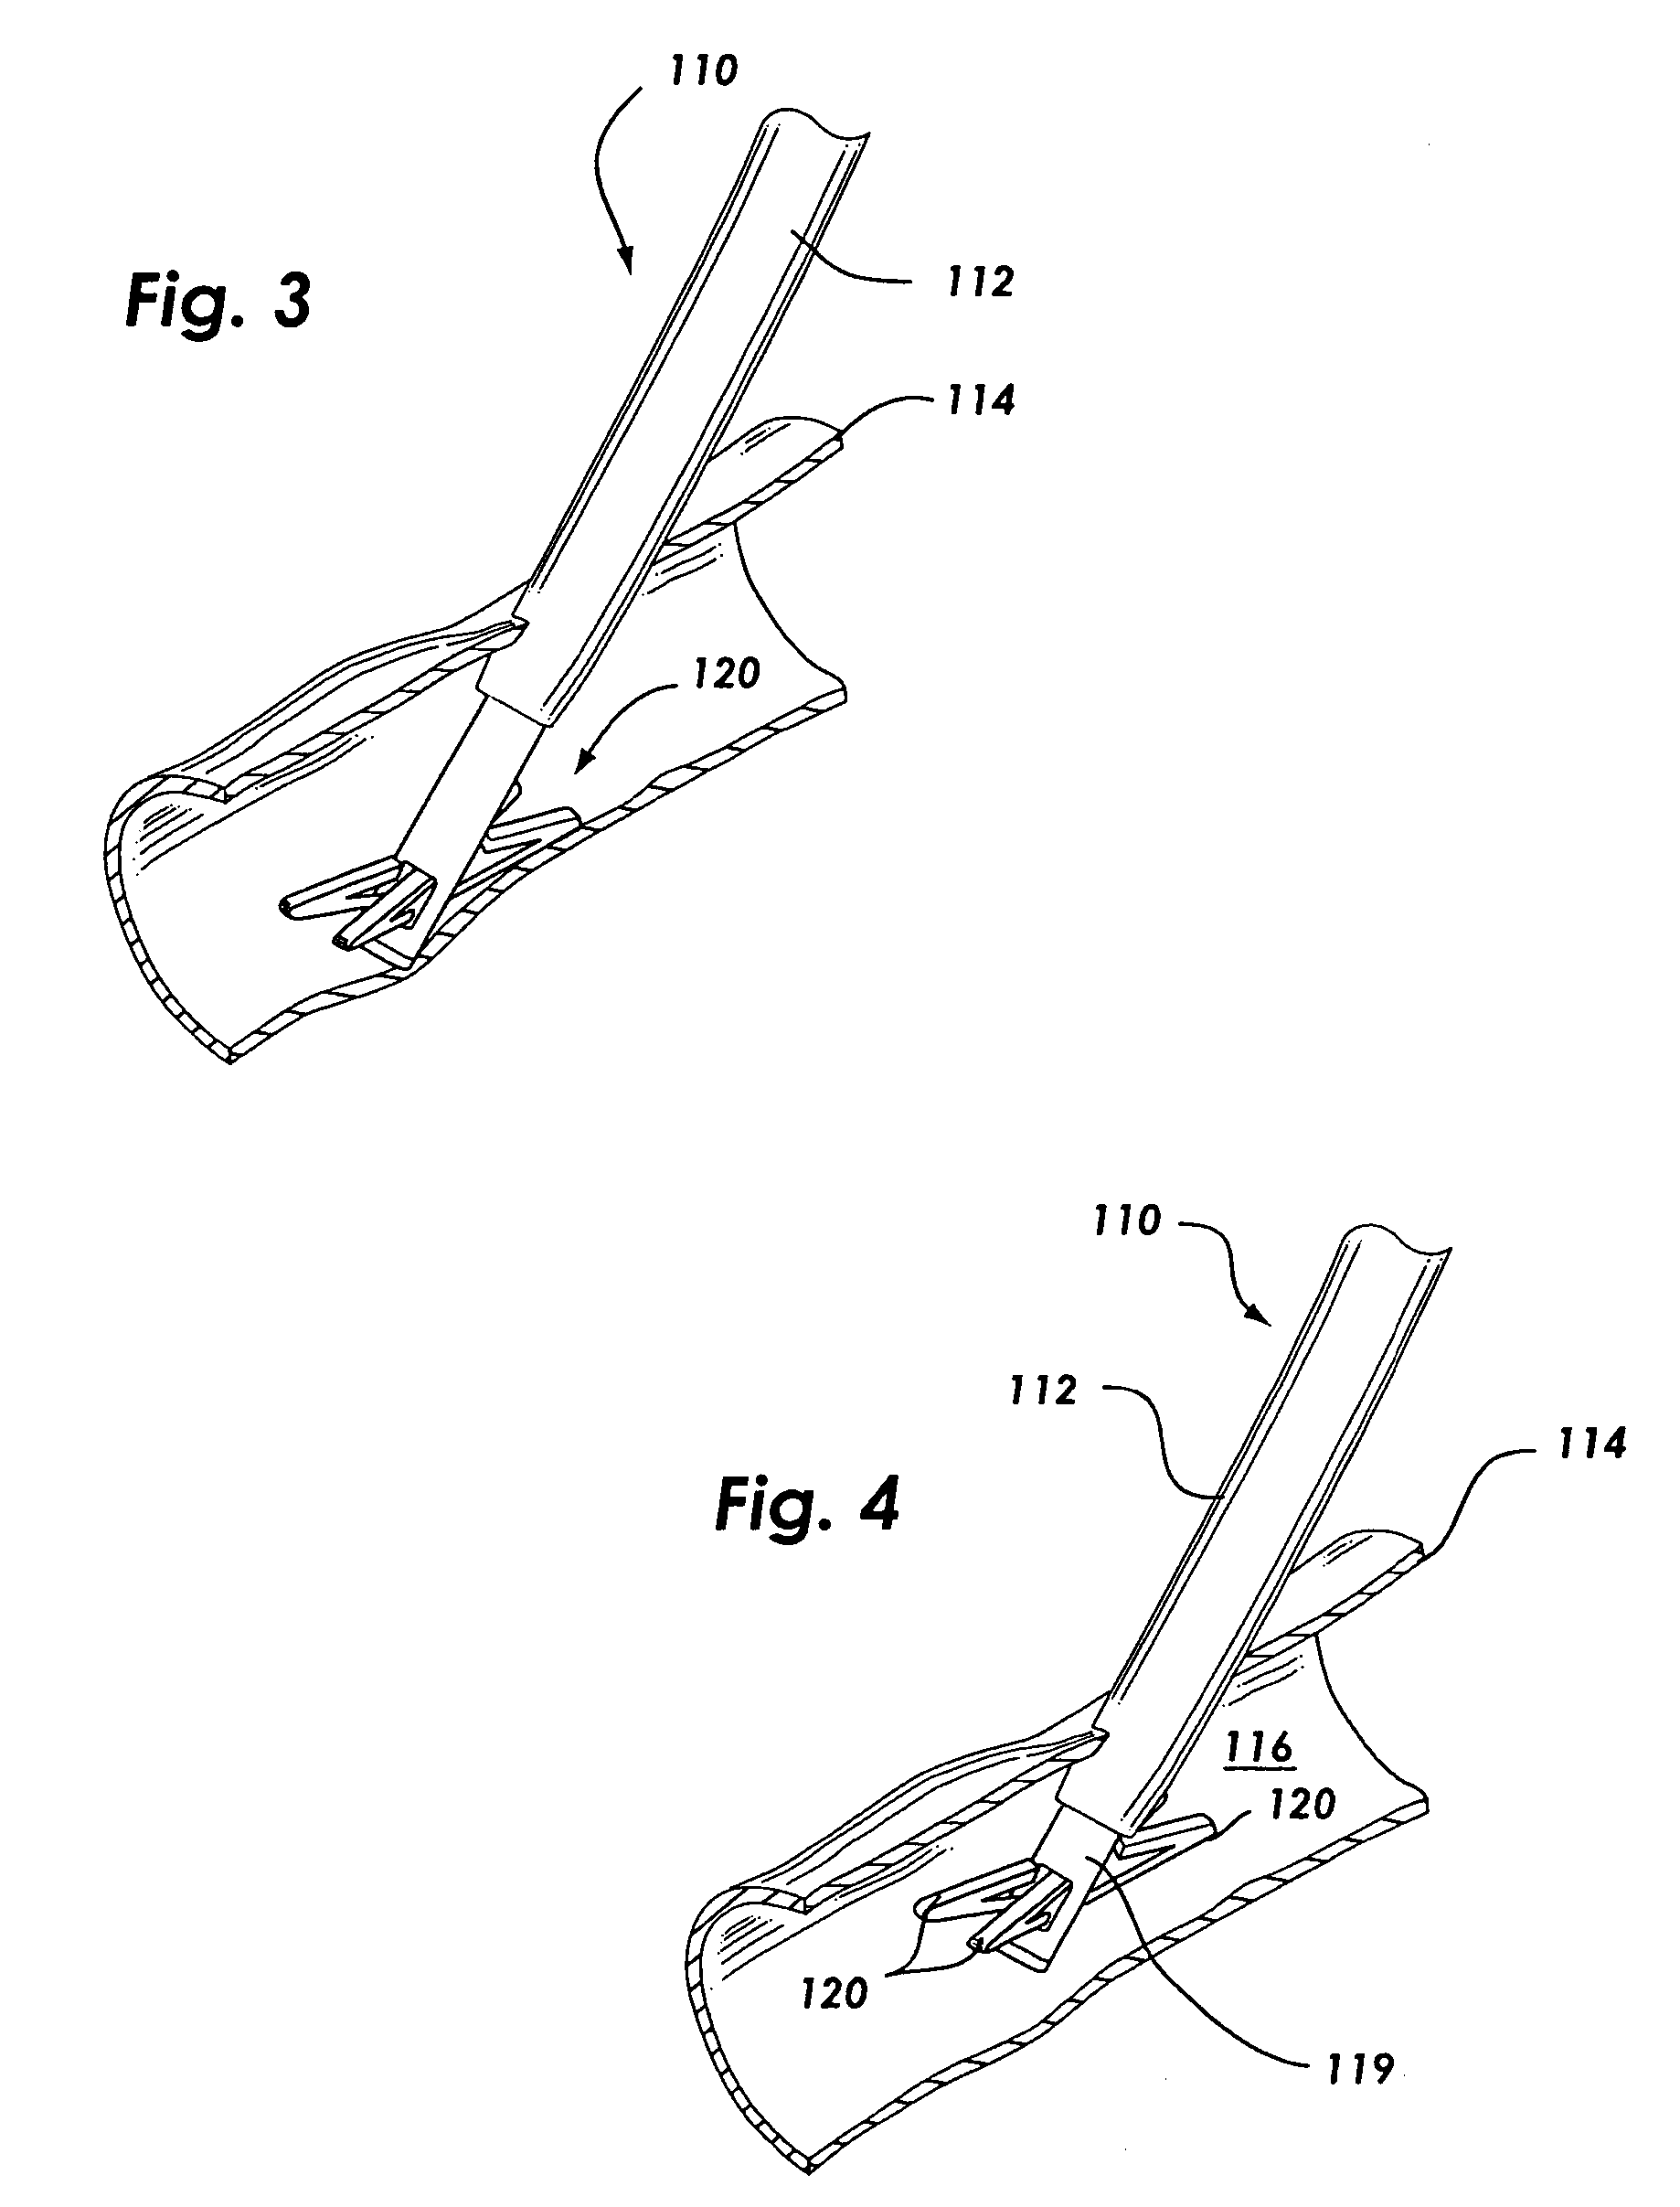 Suture based vascular closure apparatus and method incorporating a pre-tied knot